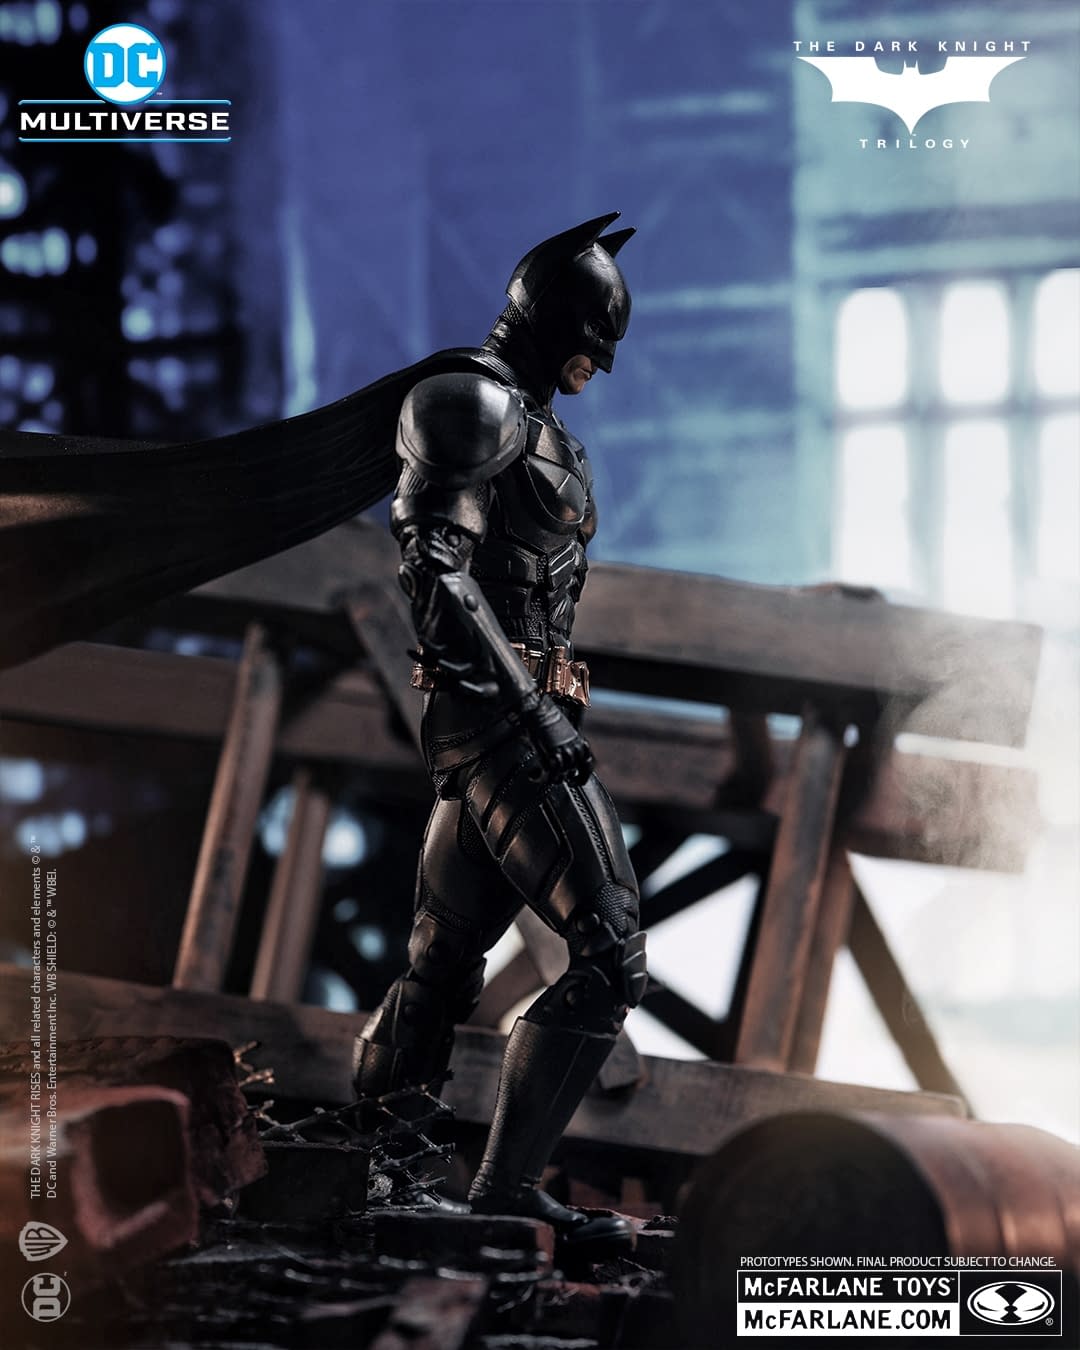 The Dark Knight Trilogy Coming Soon to McFarlane Toys DC Multiverse 